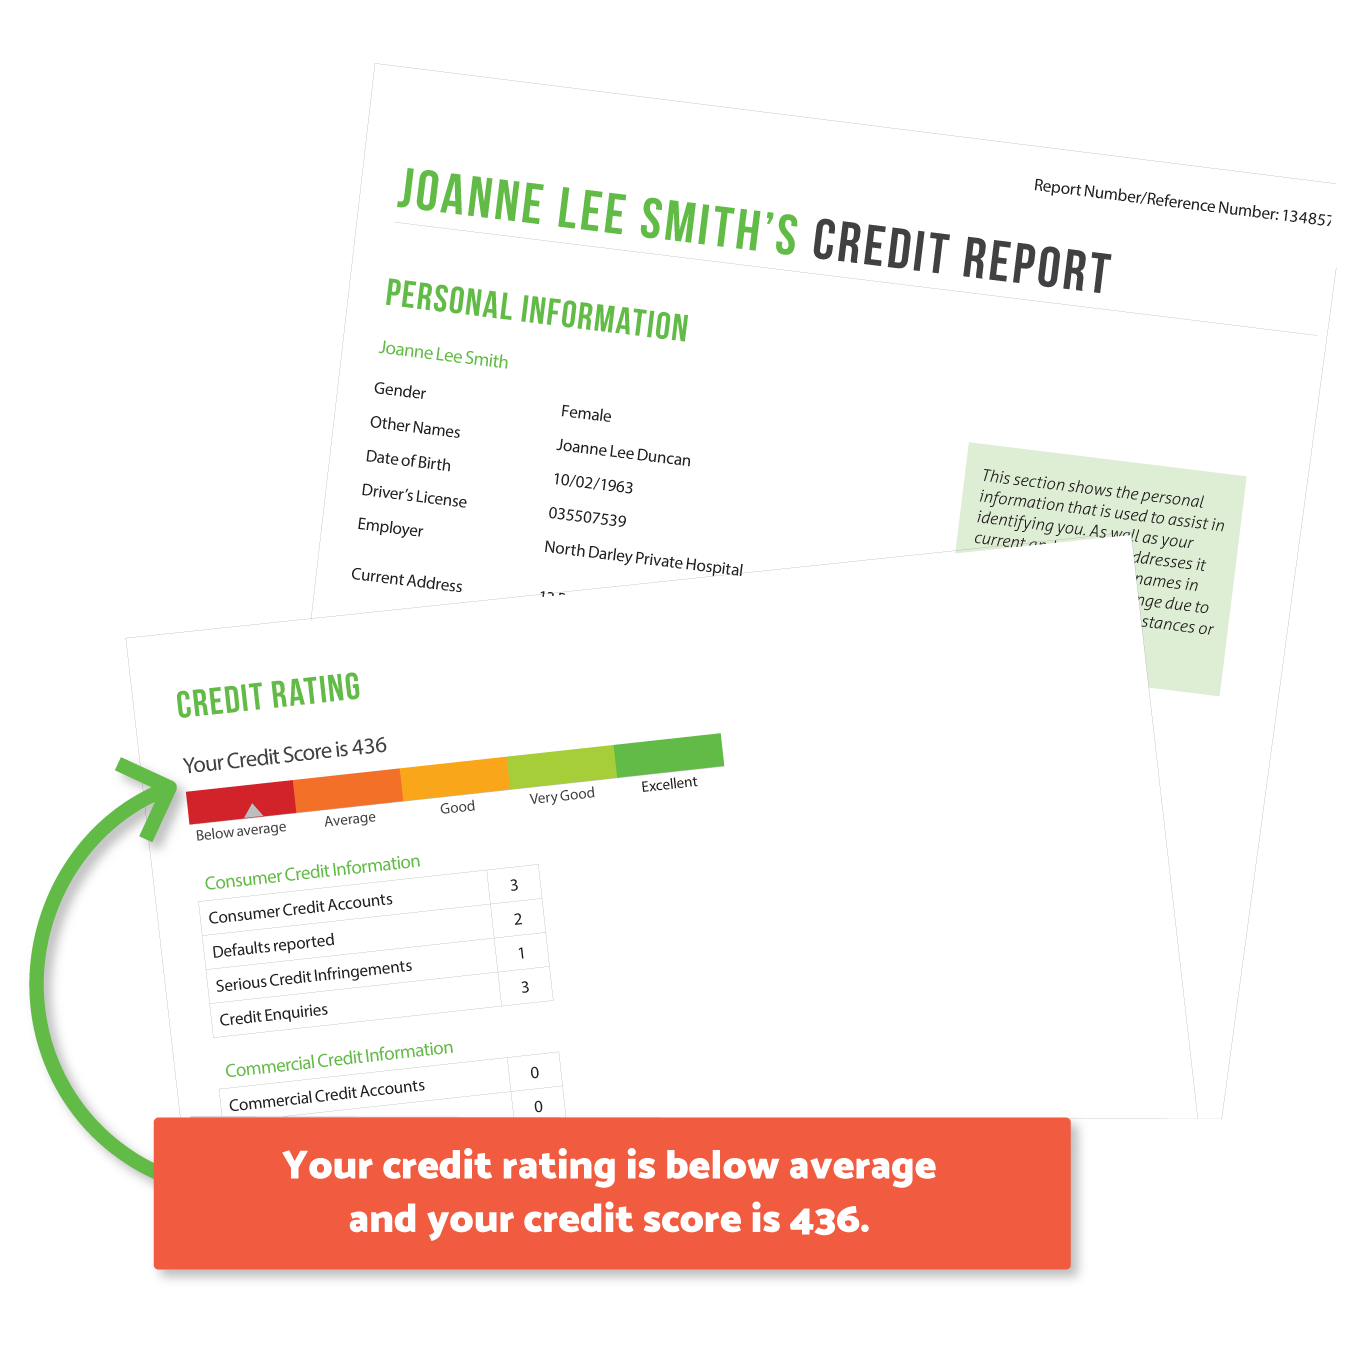 An example of what a credit report looks like